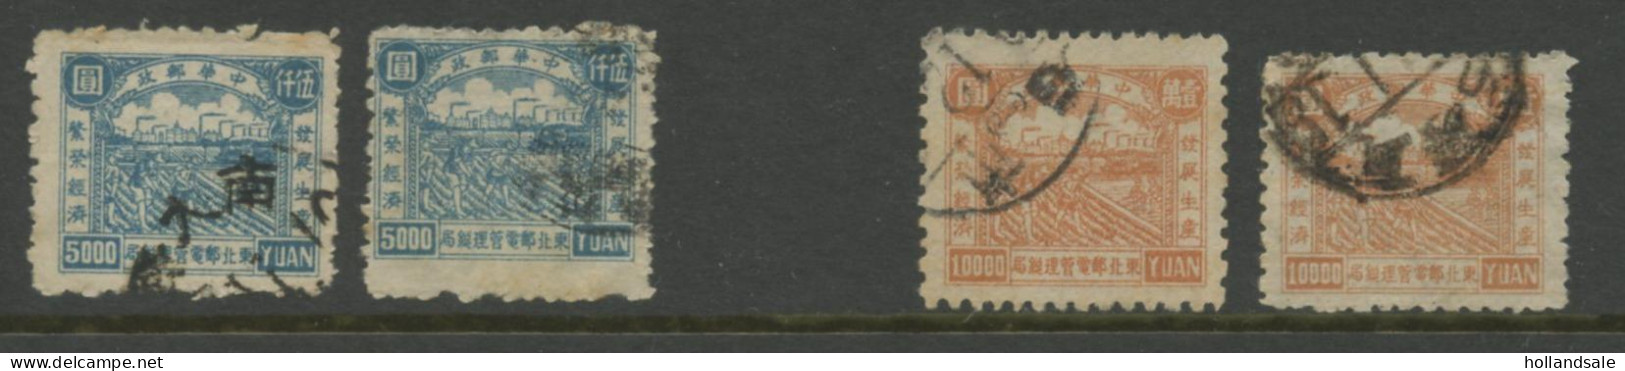 CHINA NORTH EAST - 1949 MICHEL # 133 And 134. Both 2x Used. - Chine Du Nord-Est 1946-48